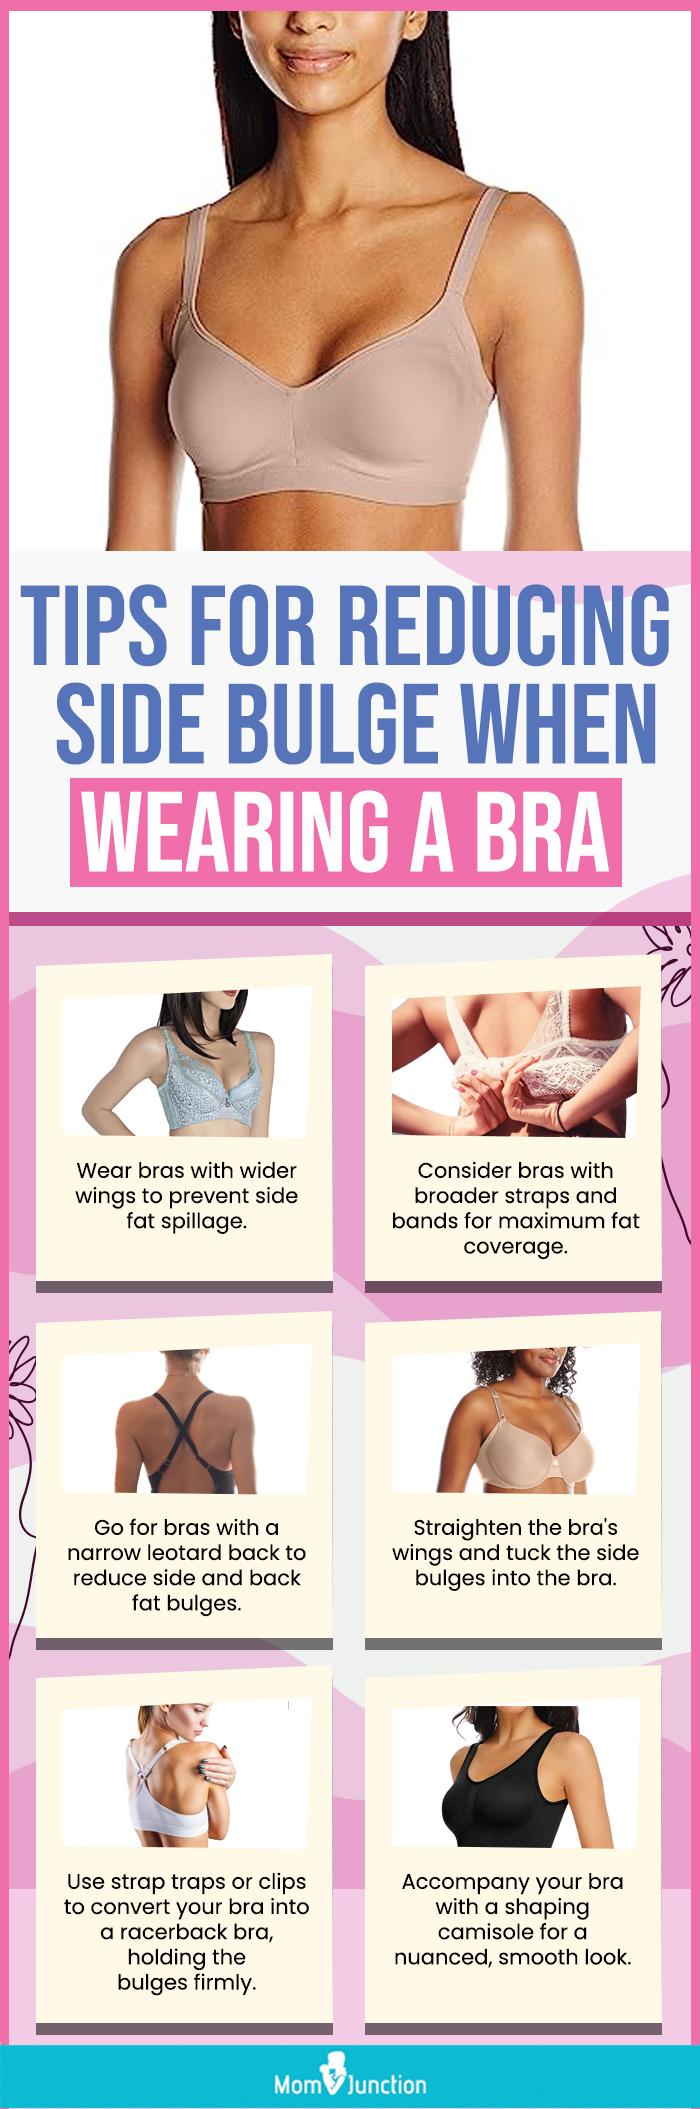 Tips For Reducing Side Bulge When Wearing A Bra (infographic)